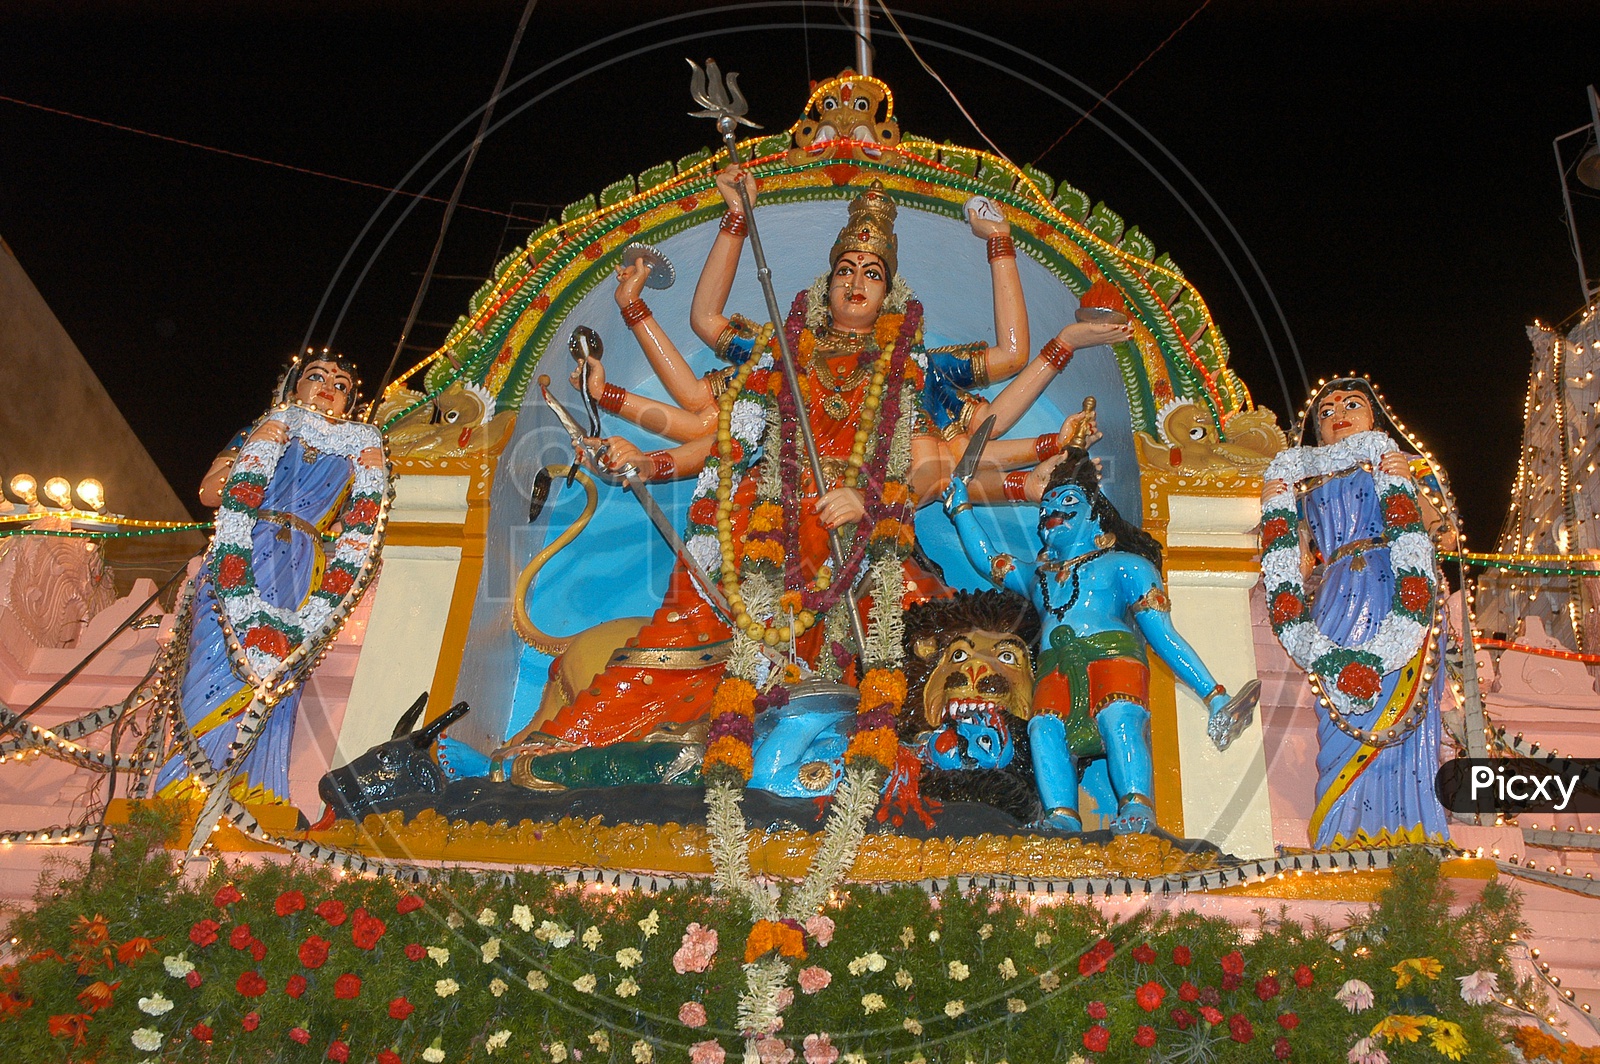 Hindu Goddess statues decorated with flowers